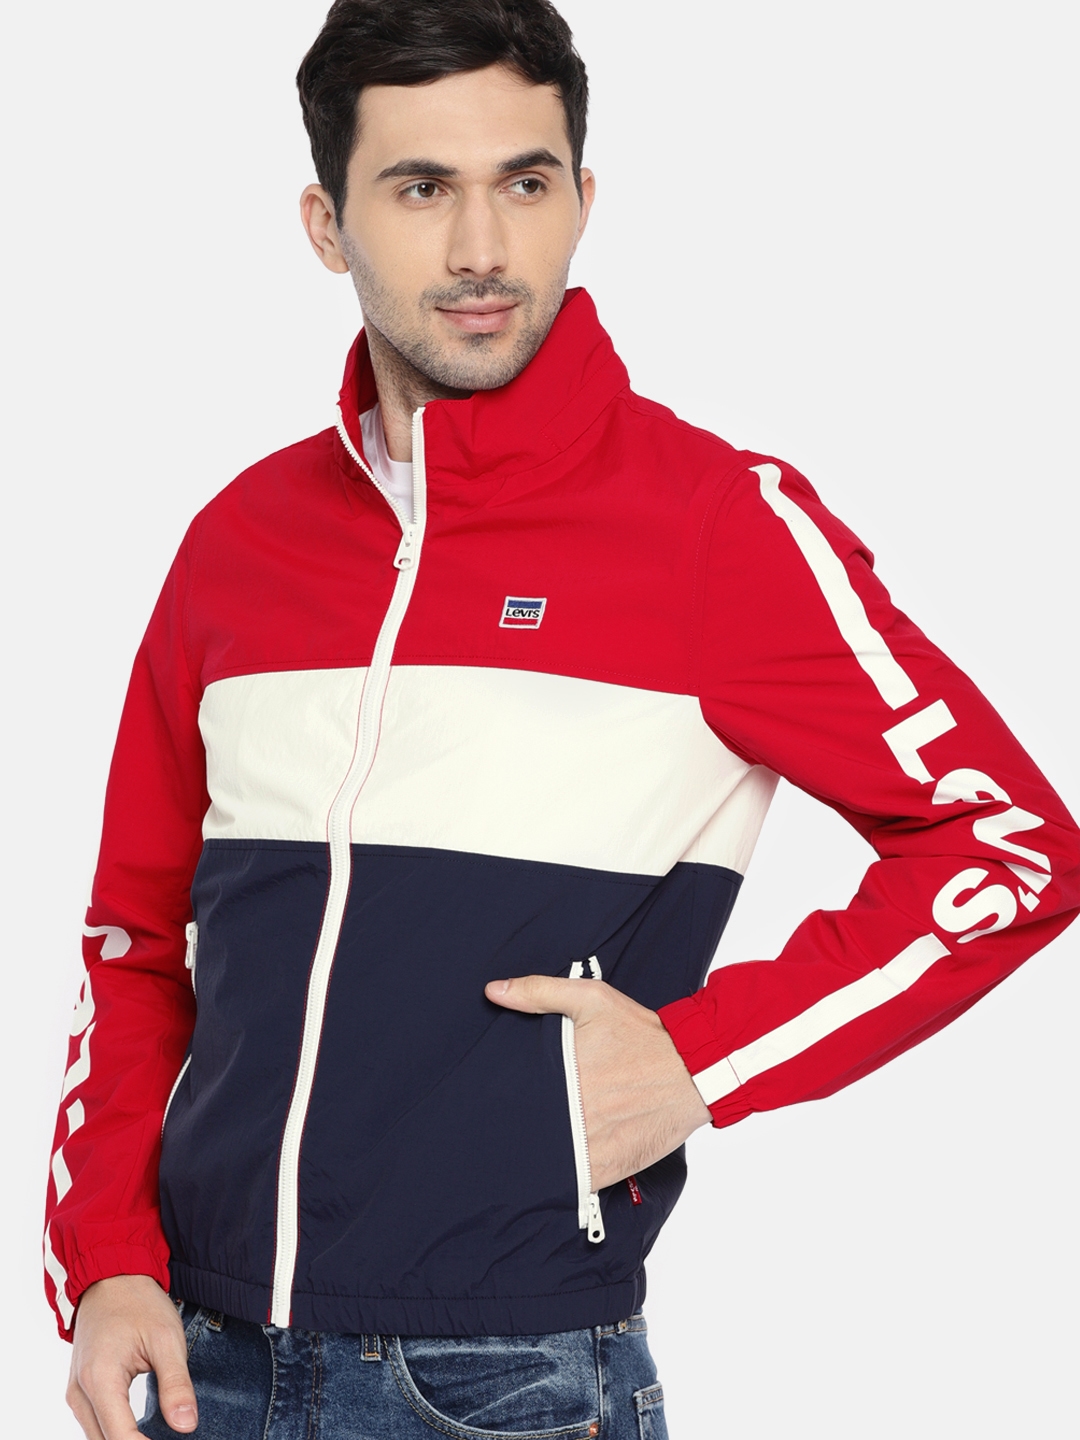 Red & Navy Blue Colour Sporty Jacket for Men from Levi’s